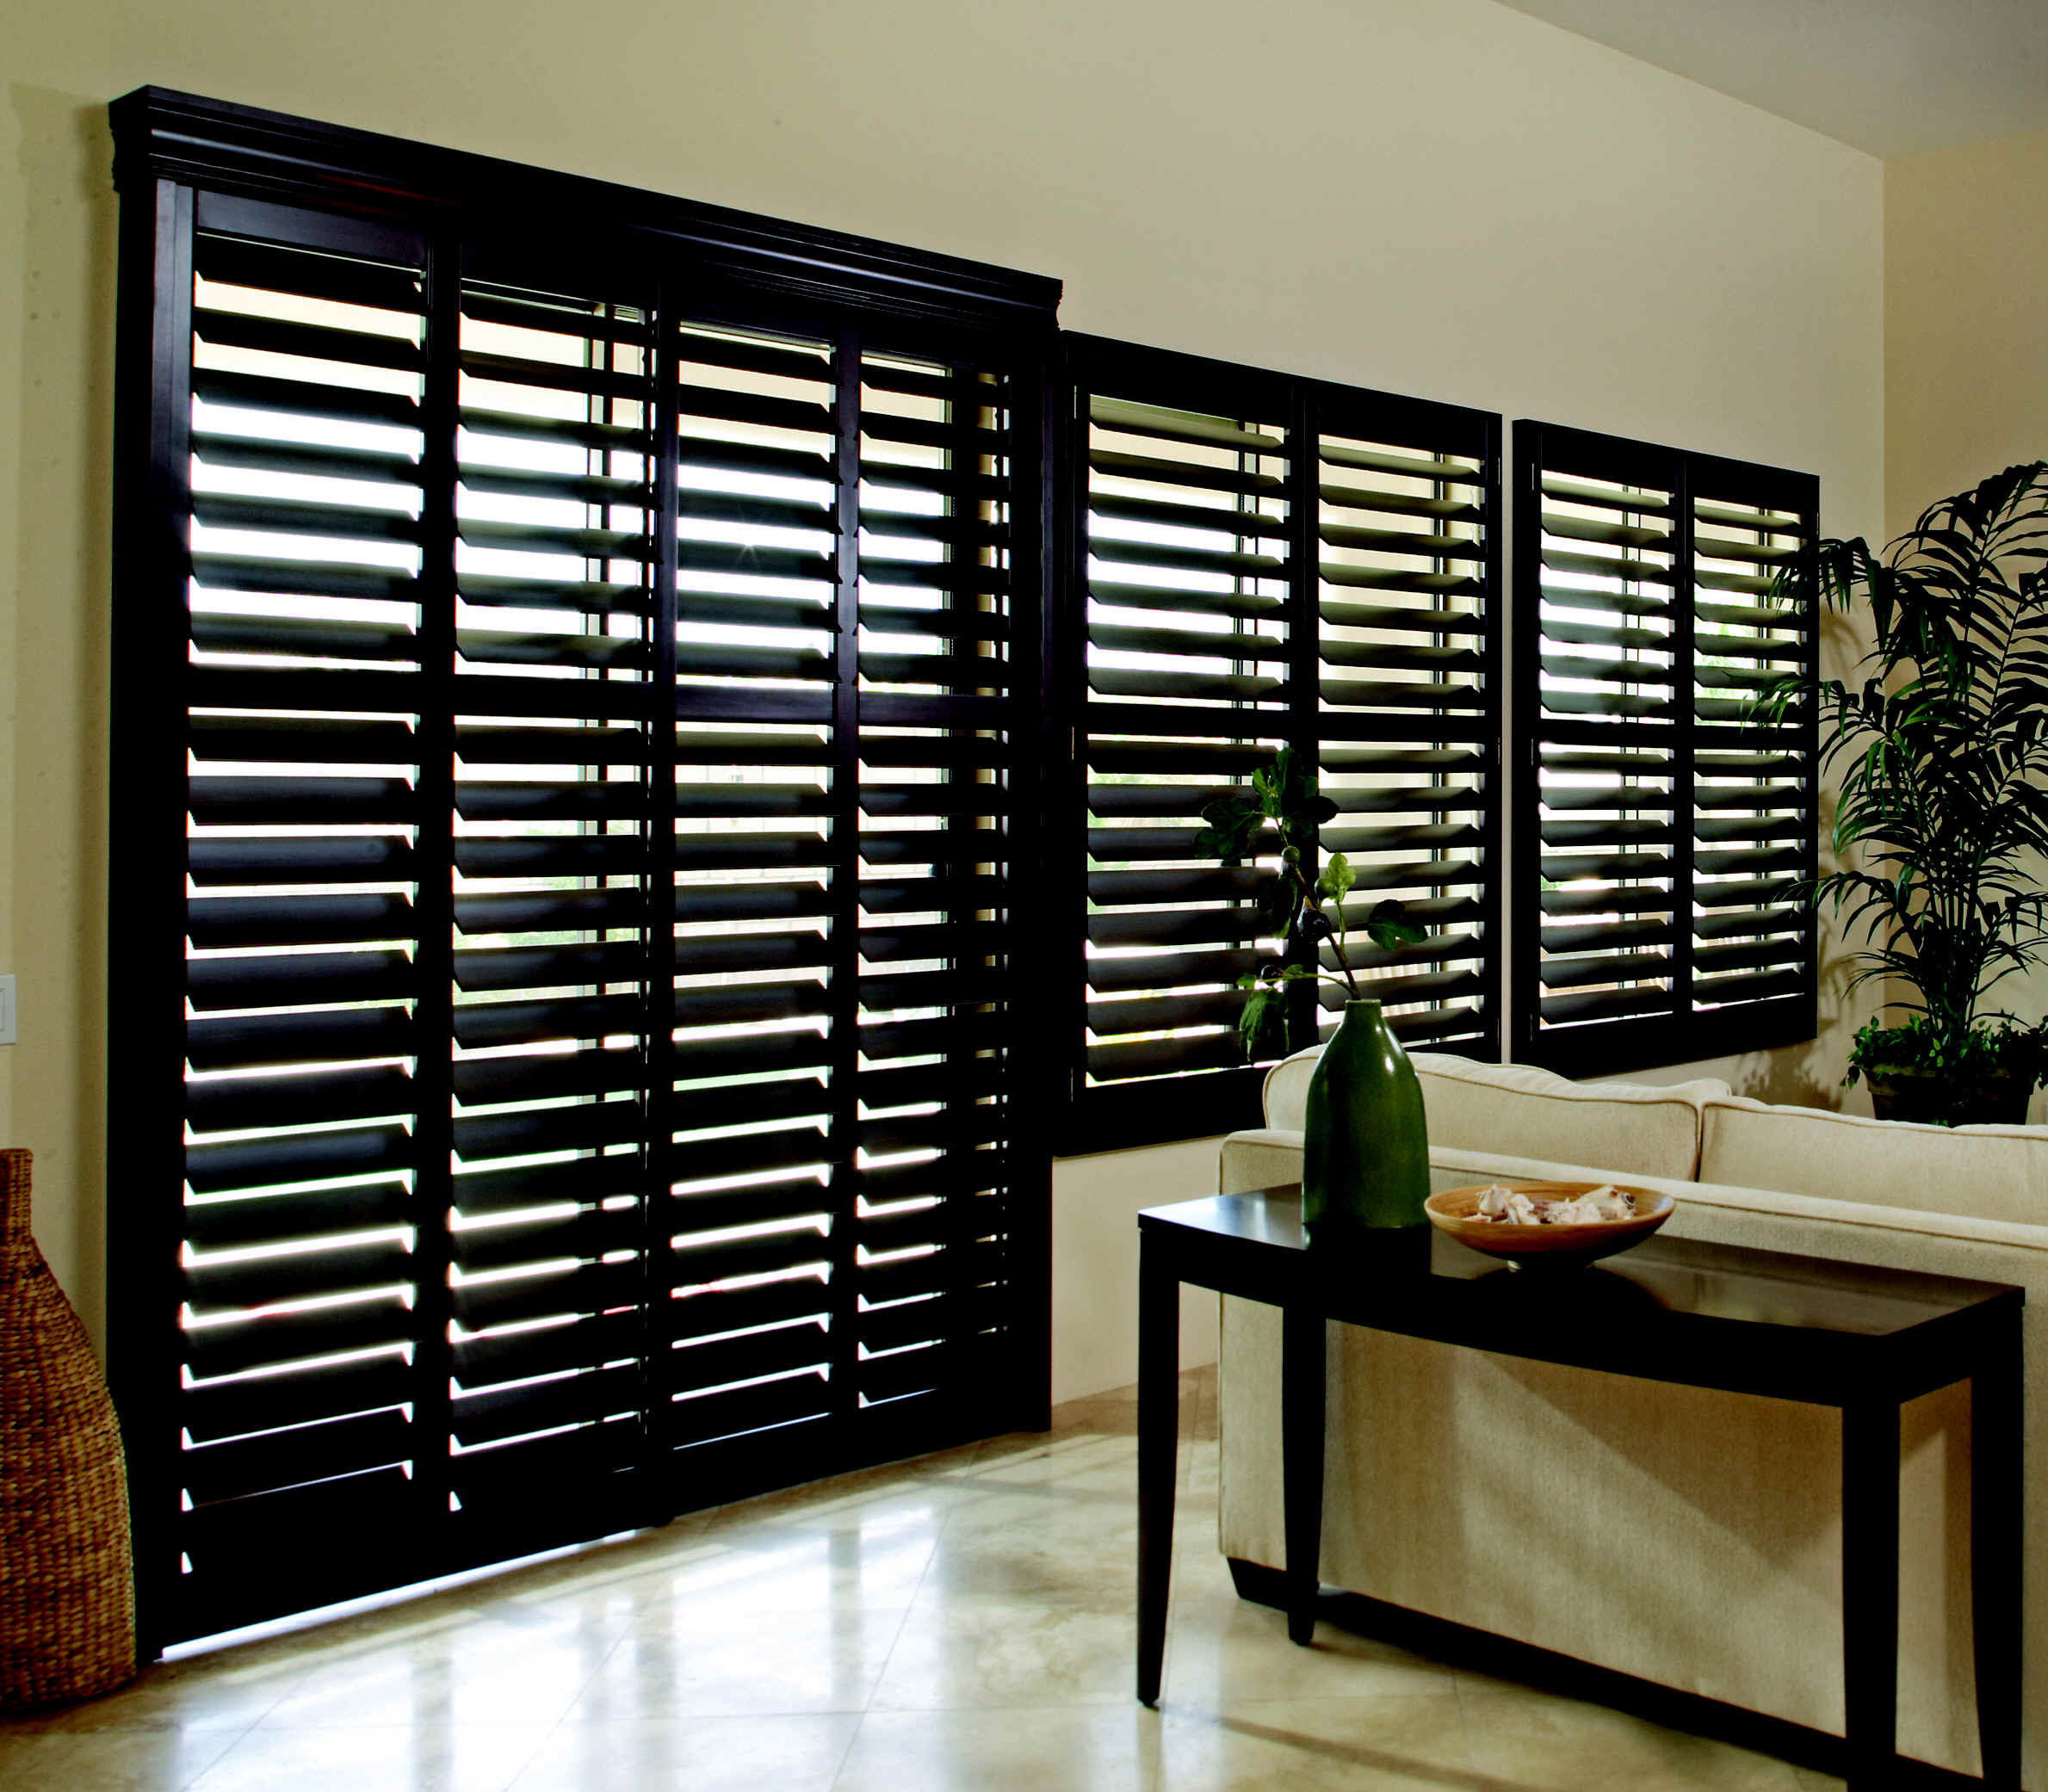 Clearview Shutters For Sale At Low Prices in Gile